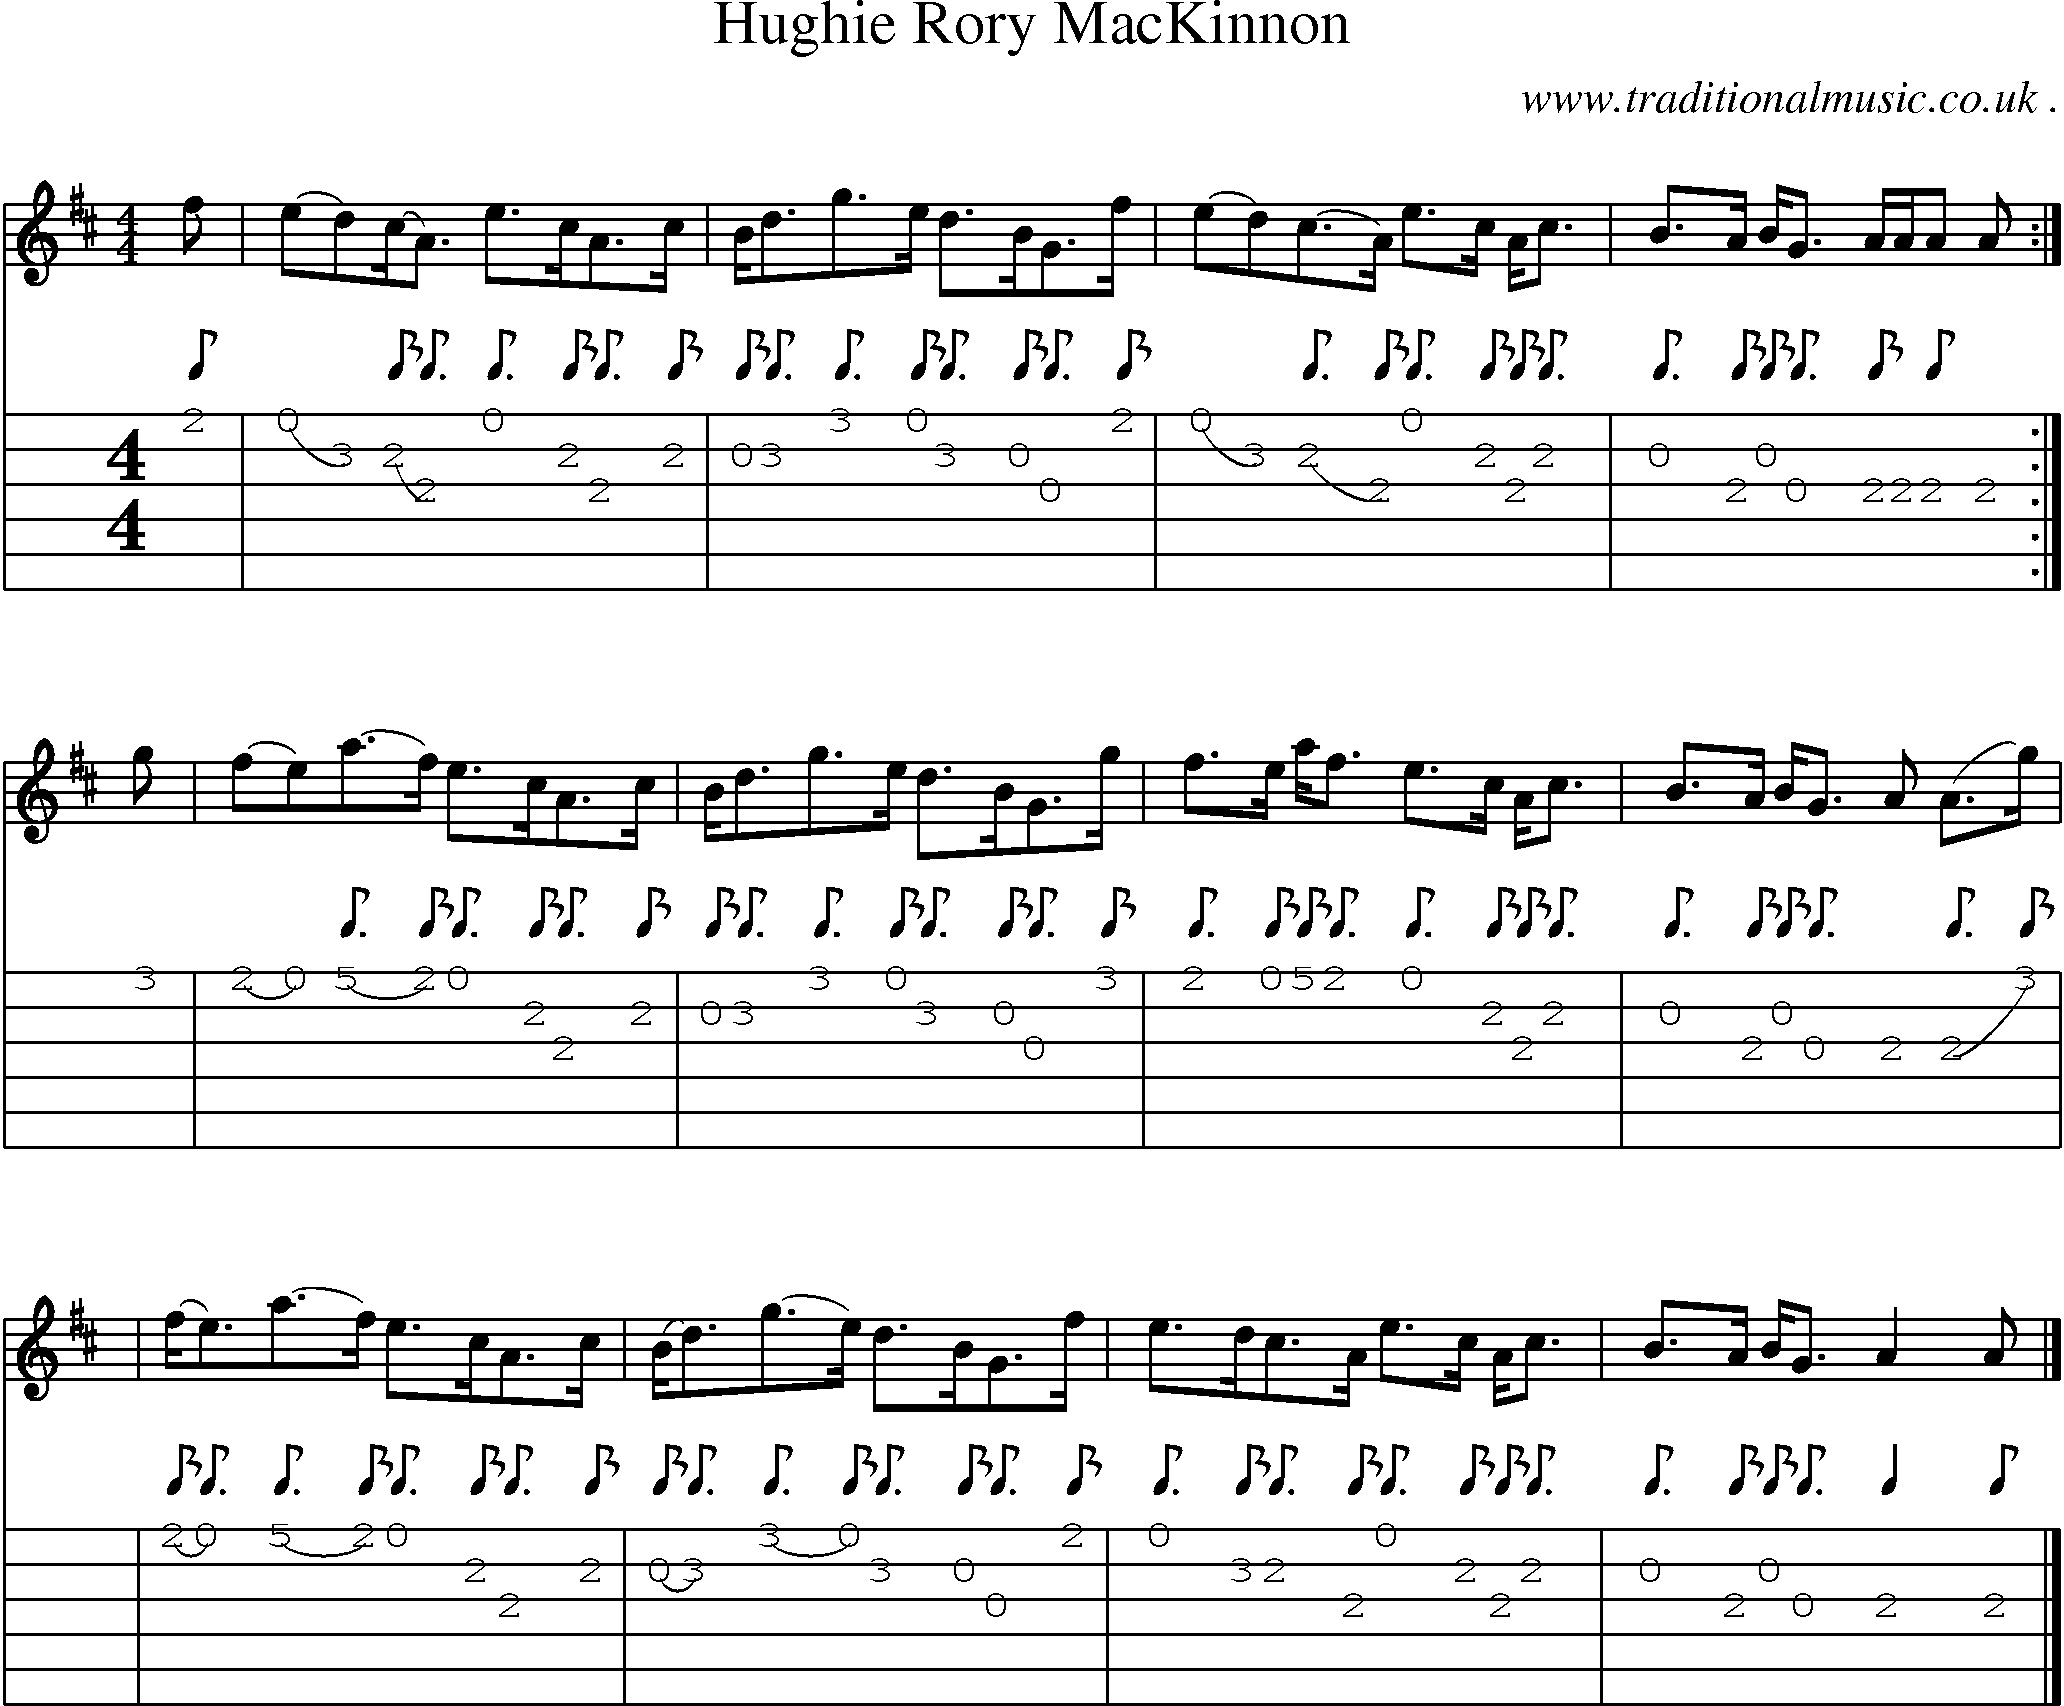 Sheet-music  score, Chords and Guitar Tabs for Hughie Rory Mackinnon